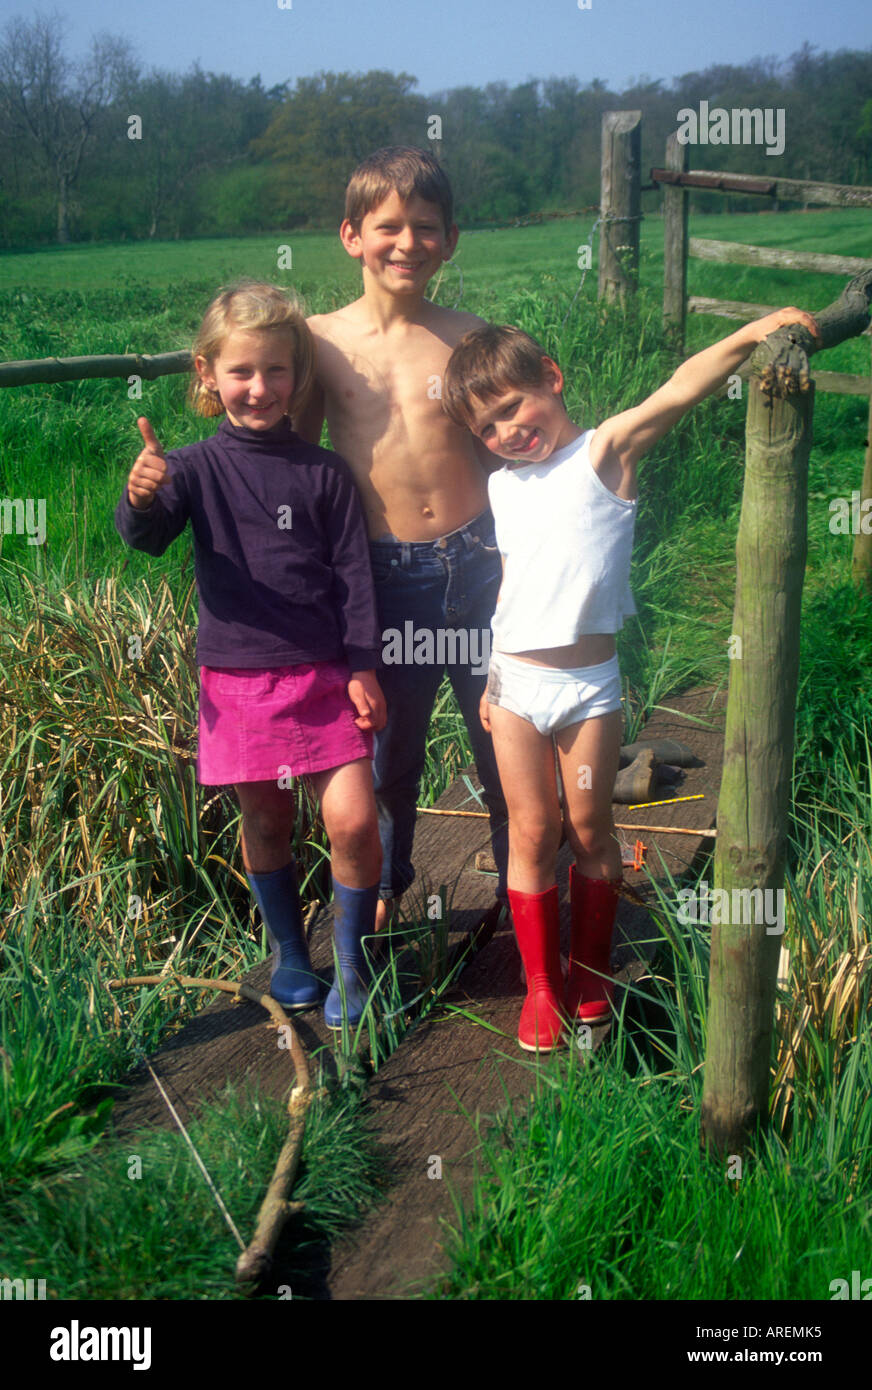 Non Identical Boy Girl Twins Playing In A Field With Their Big Brother Stock Photo Alamy